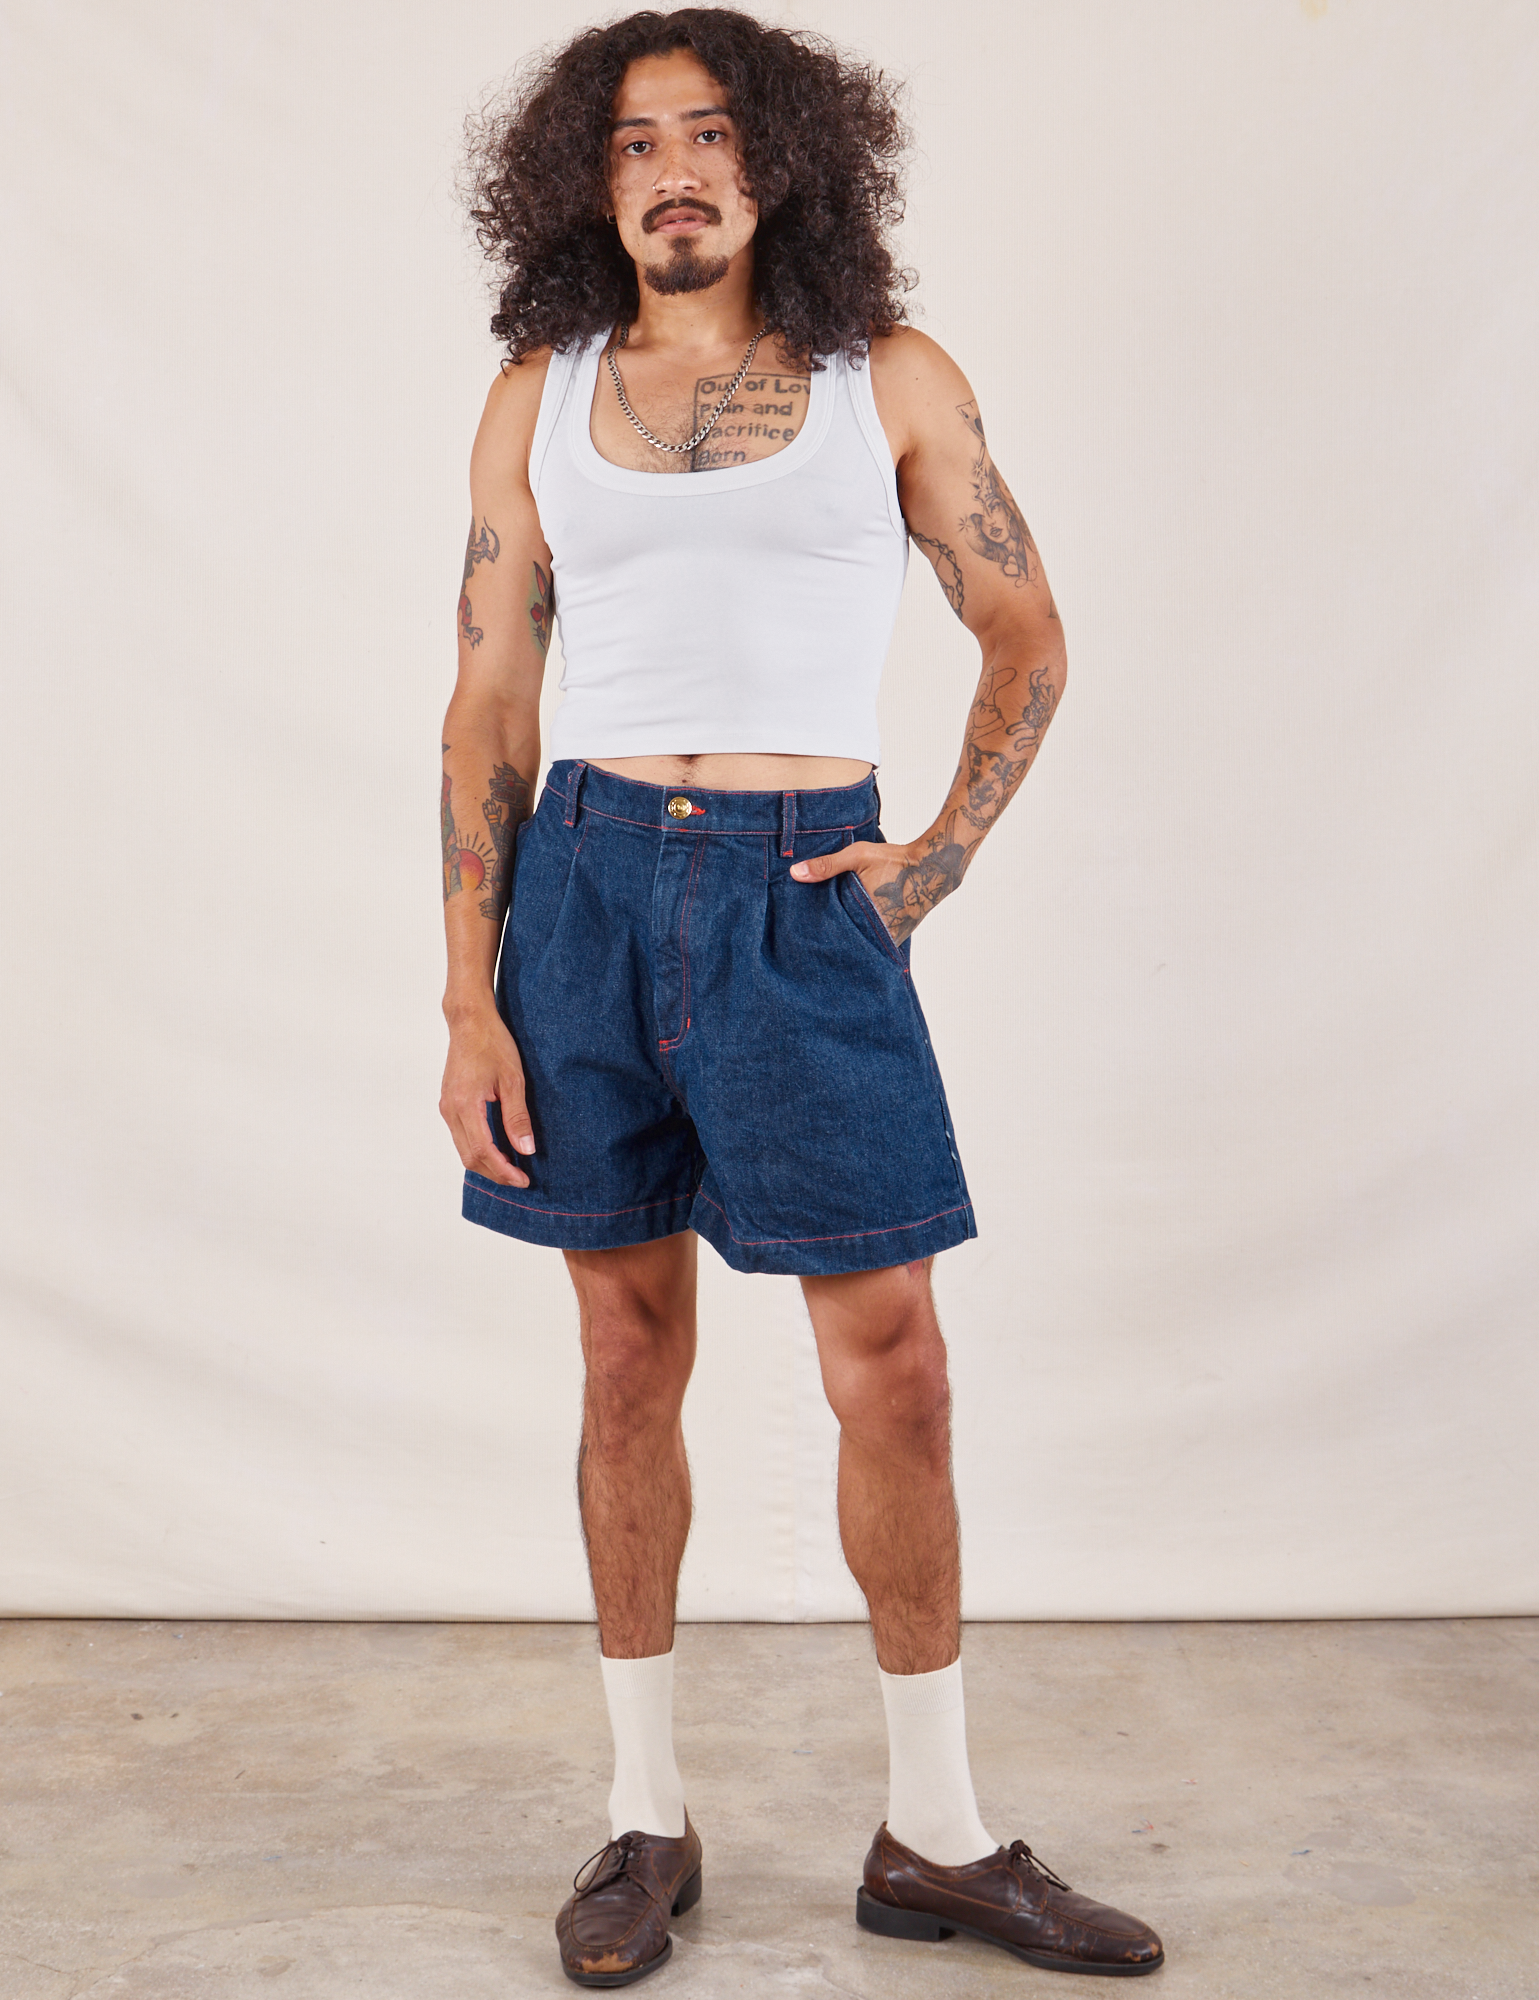 Jesse is 5'8" and wearing S Denim Trouser Shorts in Dark Wash paired with a Cropped Tank in vintage tee off-white